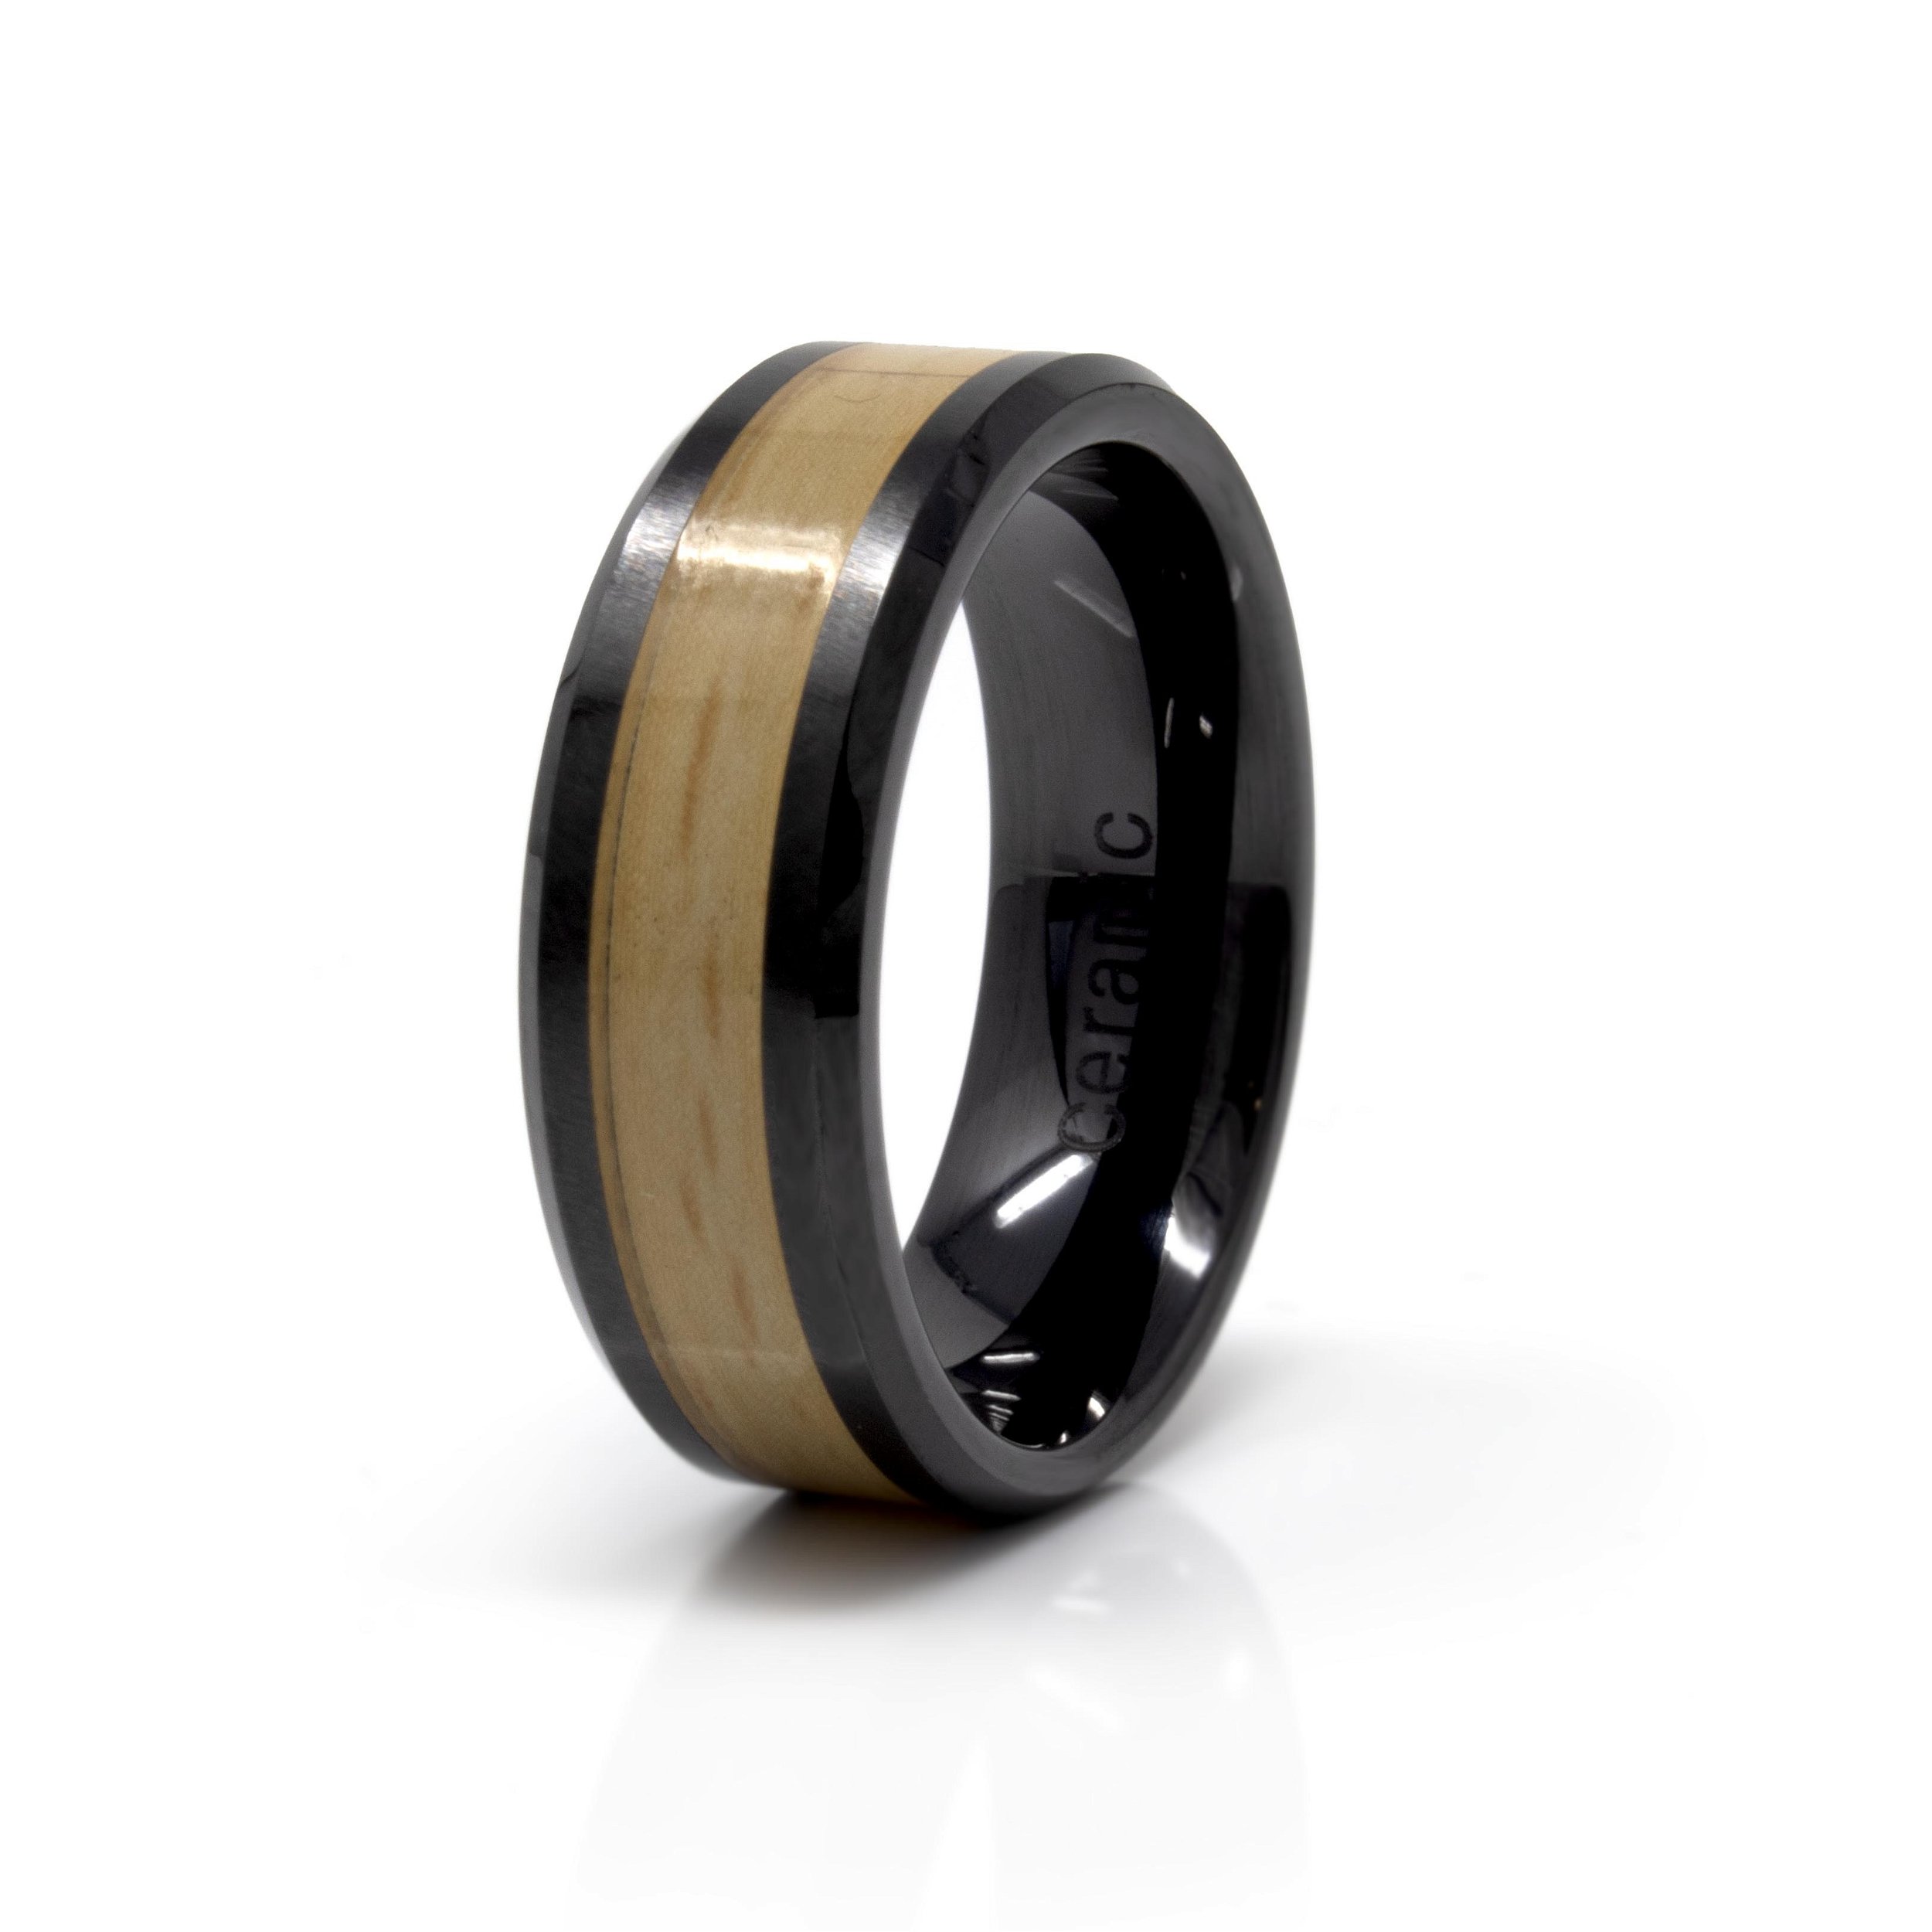 Ceramic Ring Size 12 - 8mm With Black Ip Plated & Wood Inlay Center